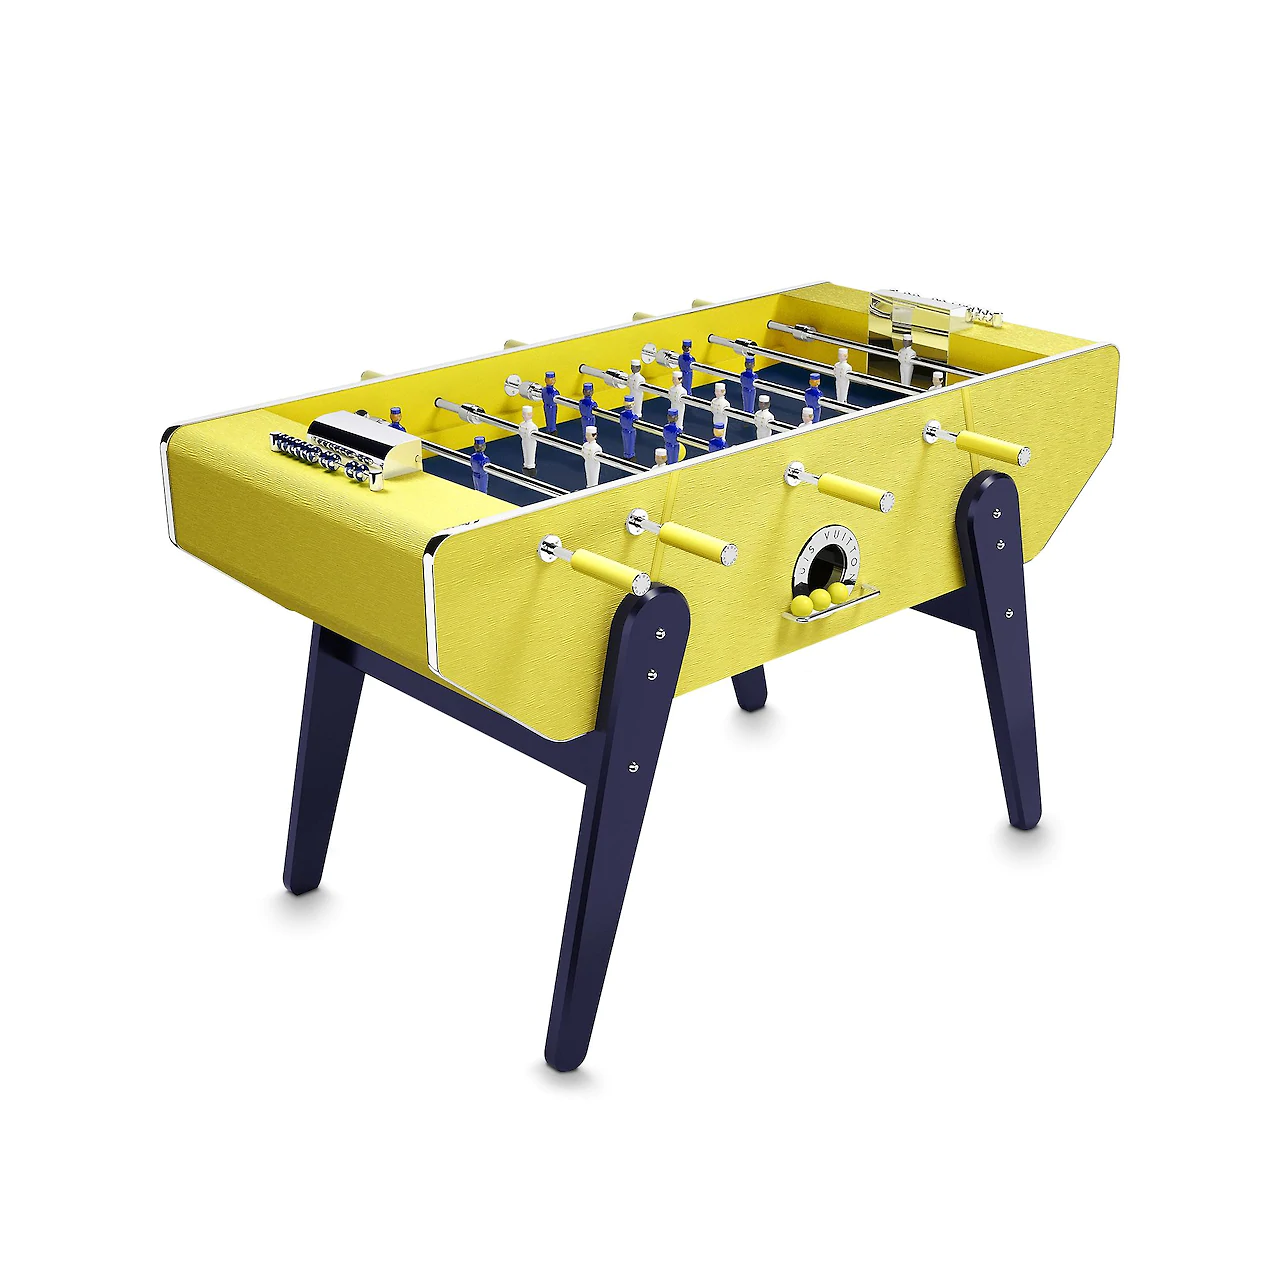 The Louis Vuitton Foosball Table Will Set You Back US$75,000